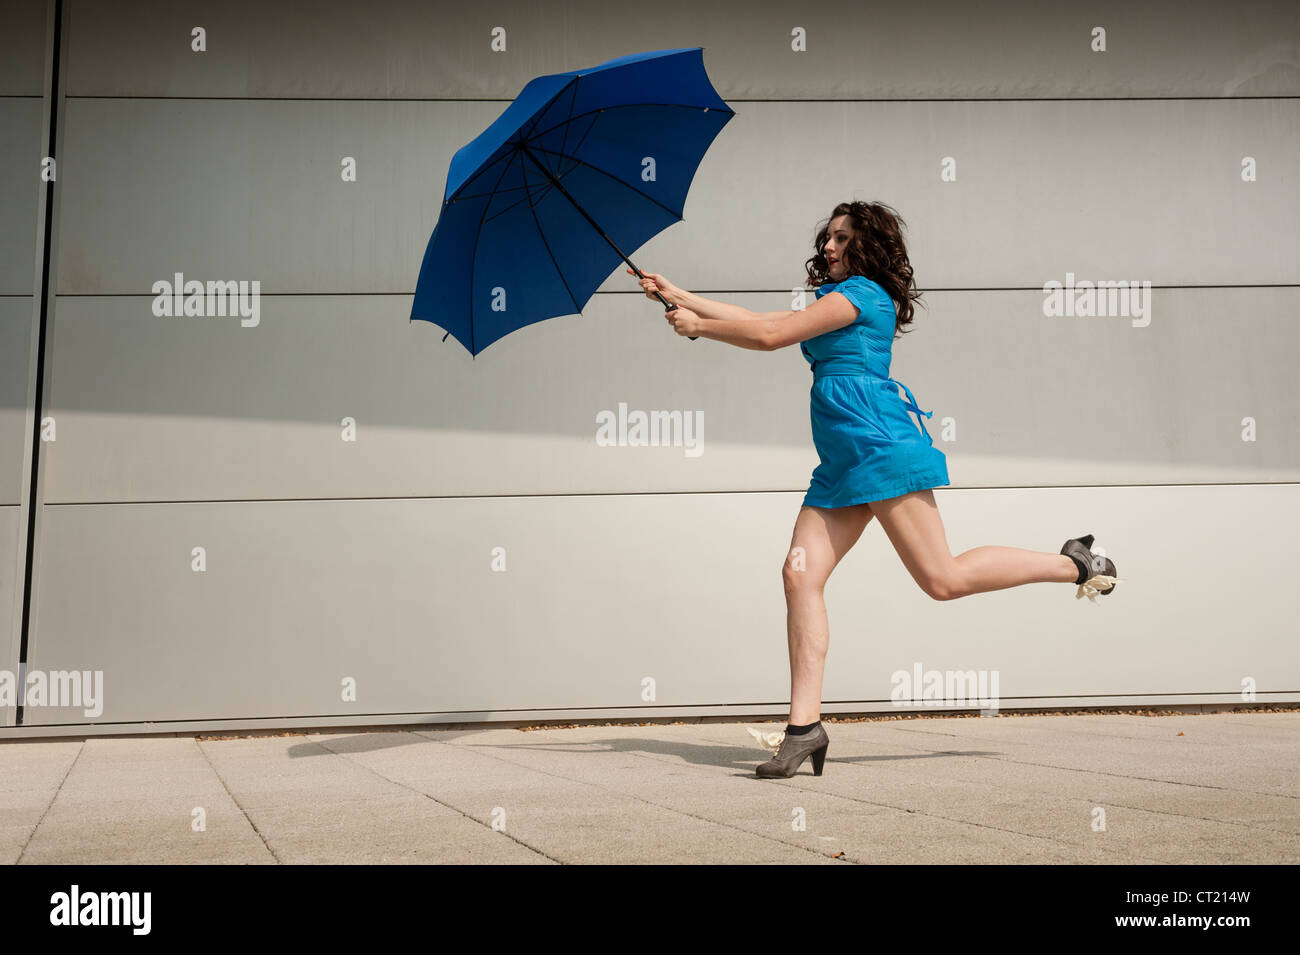 A young woman girl alone wearing a short blue dress running with a blue umbrella parasol, UK Stock Photo